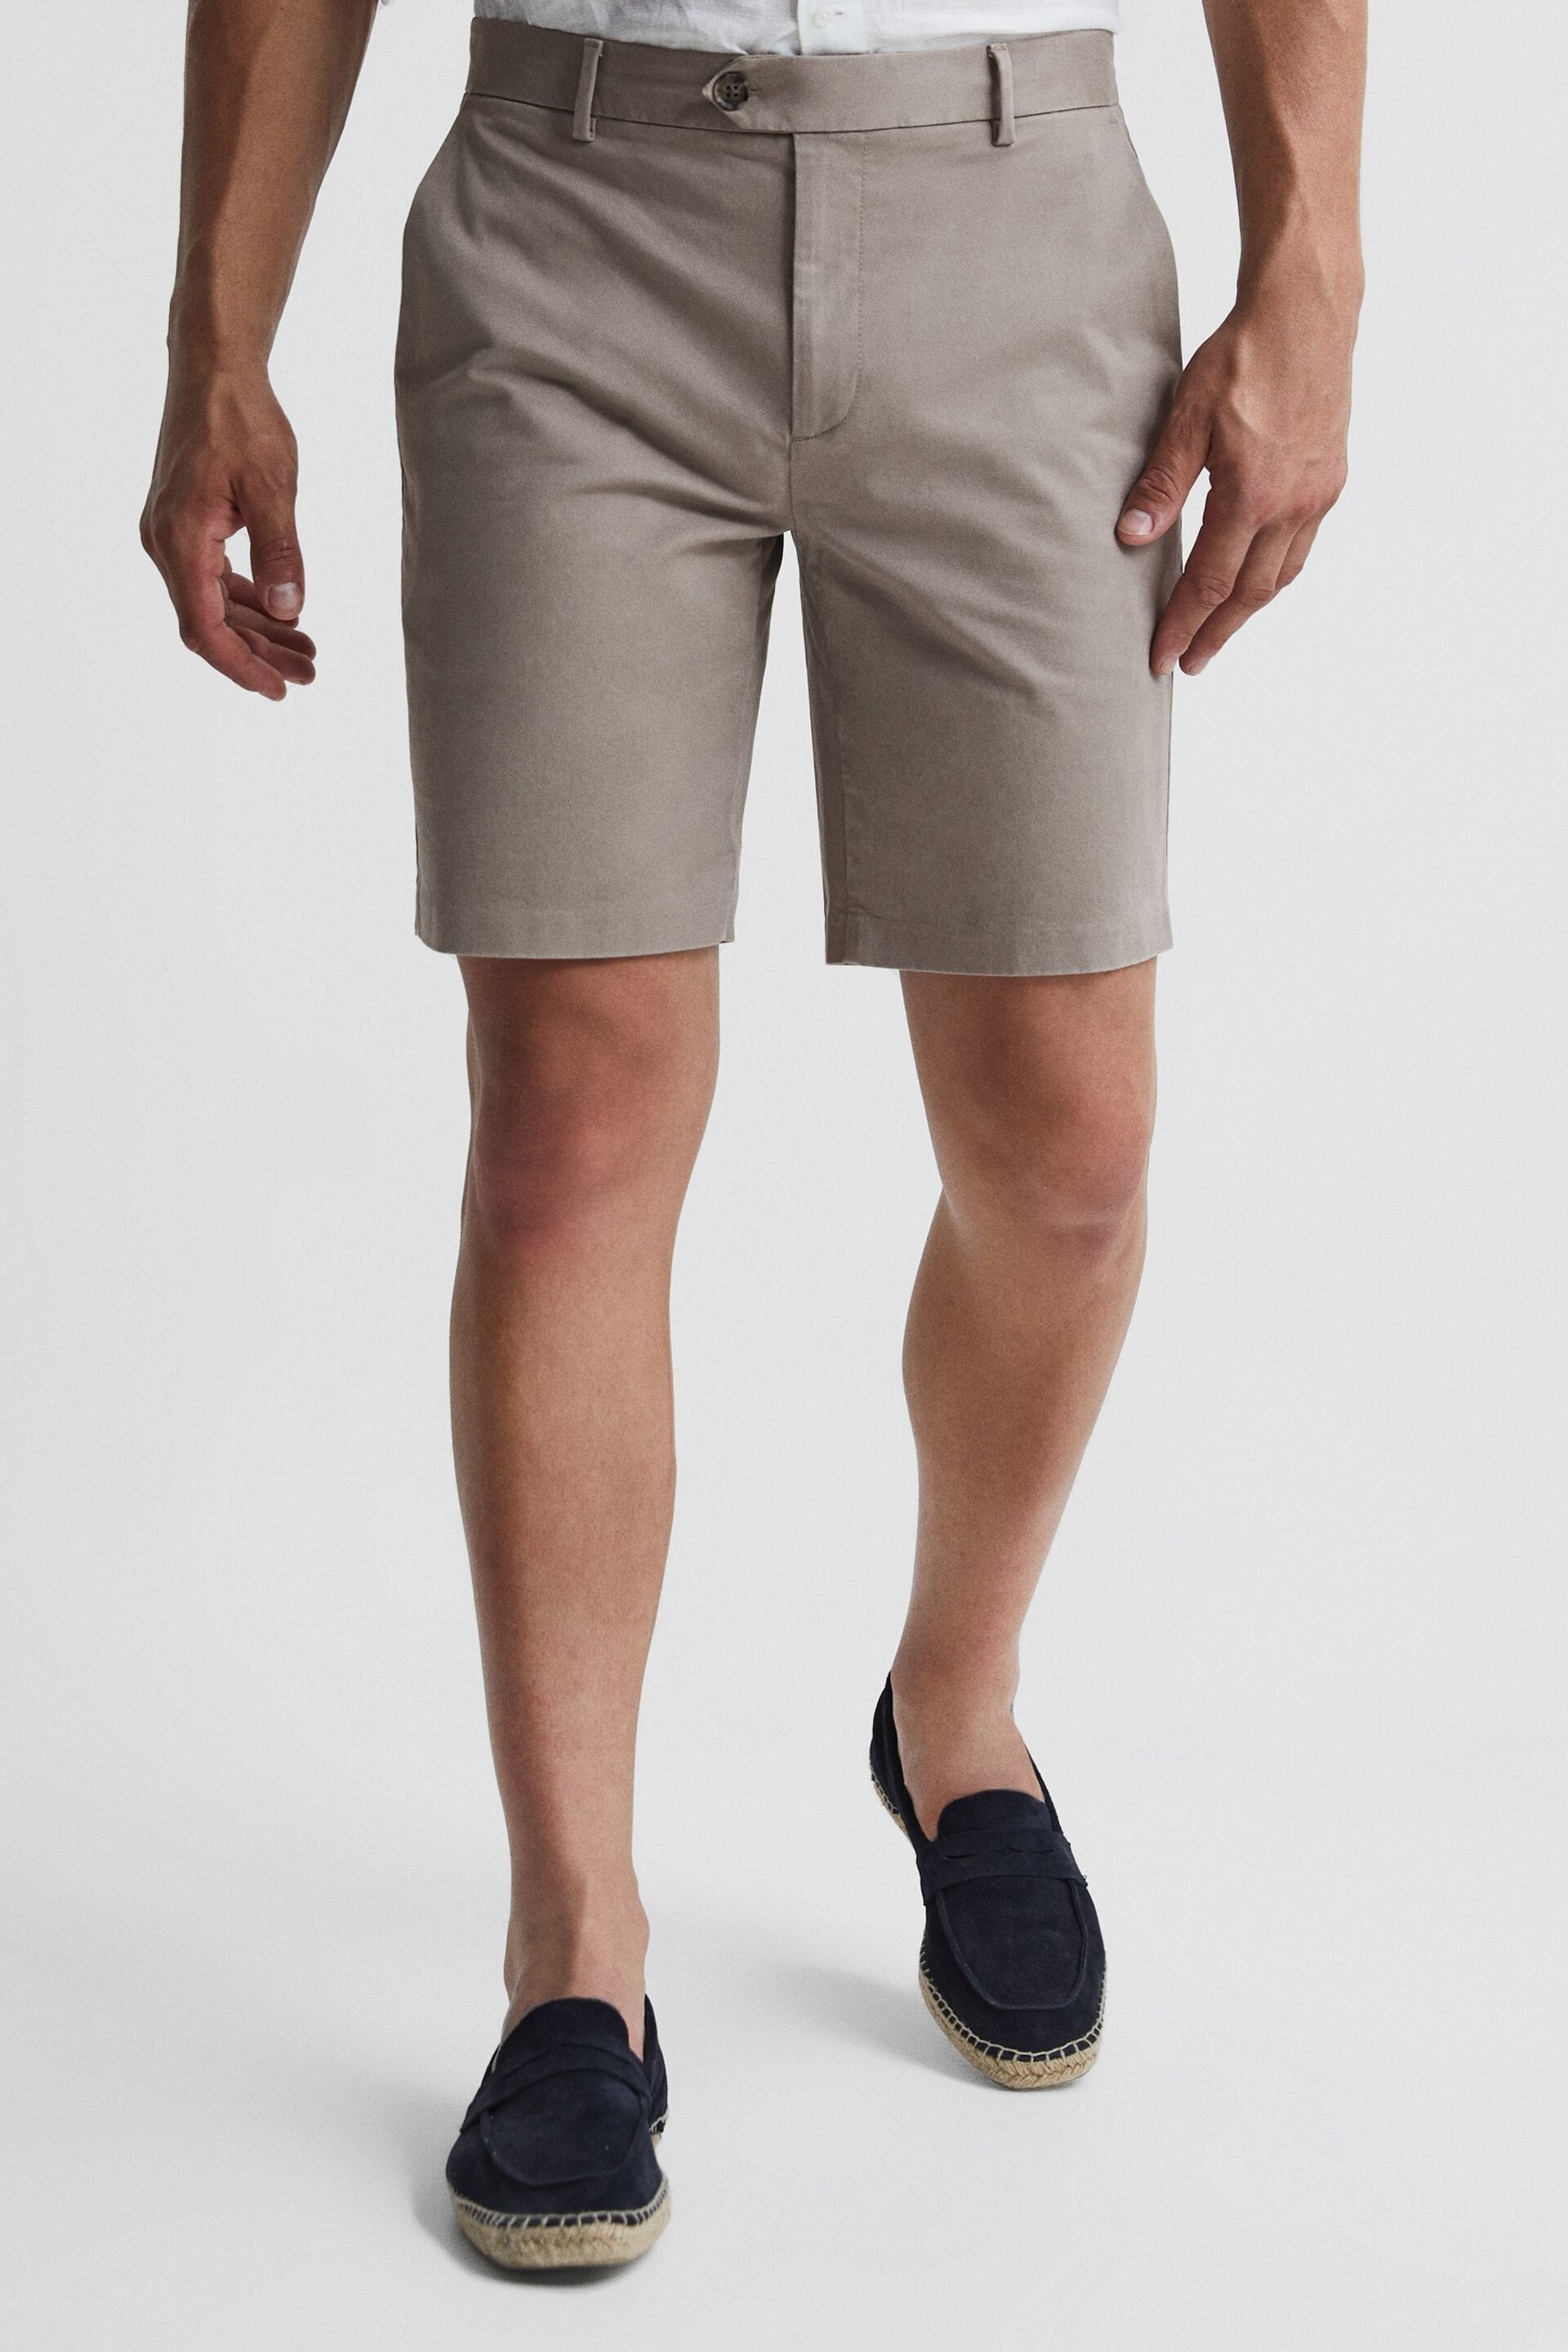 Reiss Mushroom Wicket Modern Fit Cotton Blend Chino Shorts - Image 2 of 7